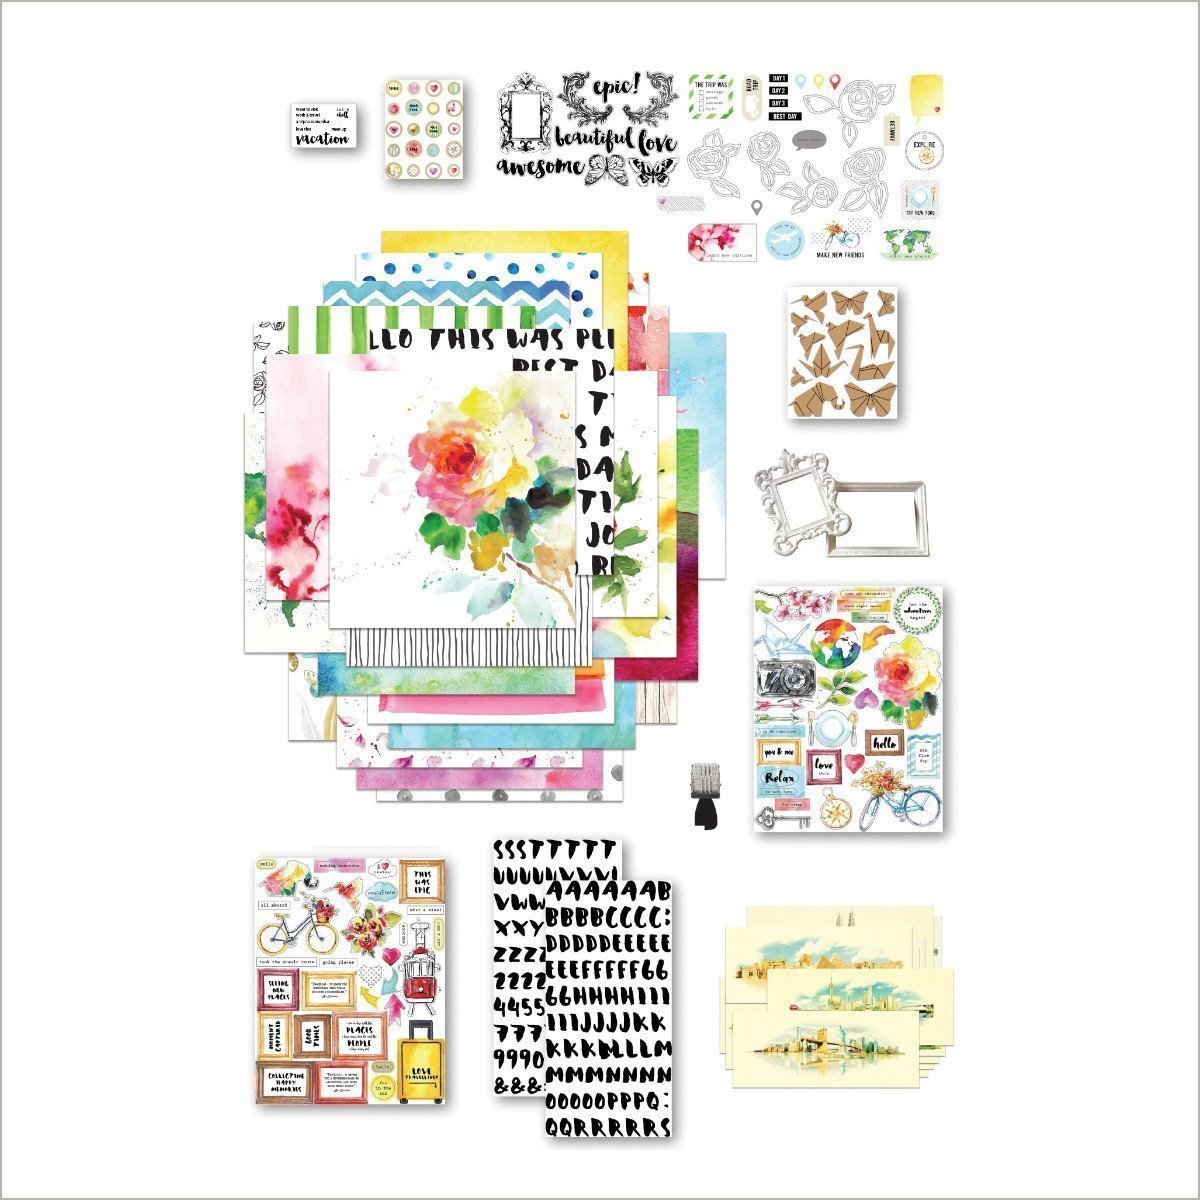 How to Start a Scrapbook Journal Quickly & Easily – Altenew